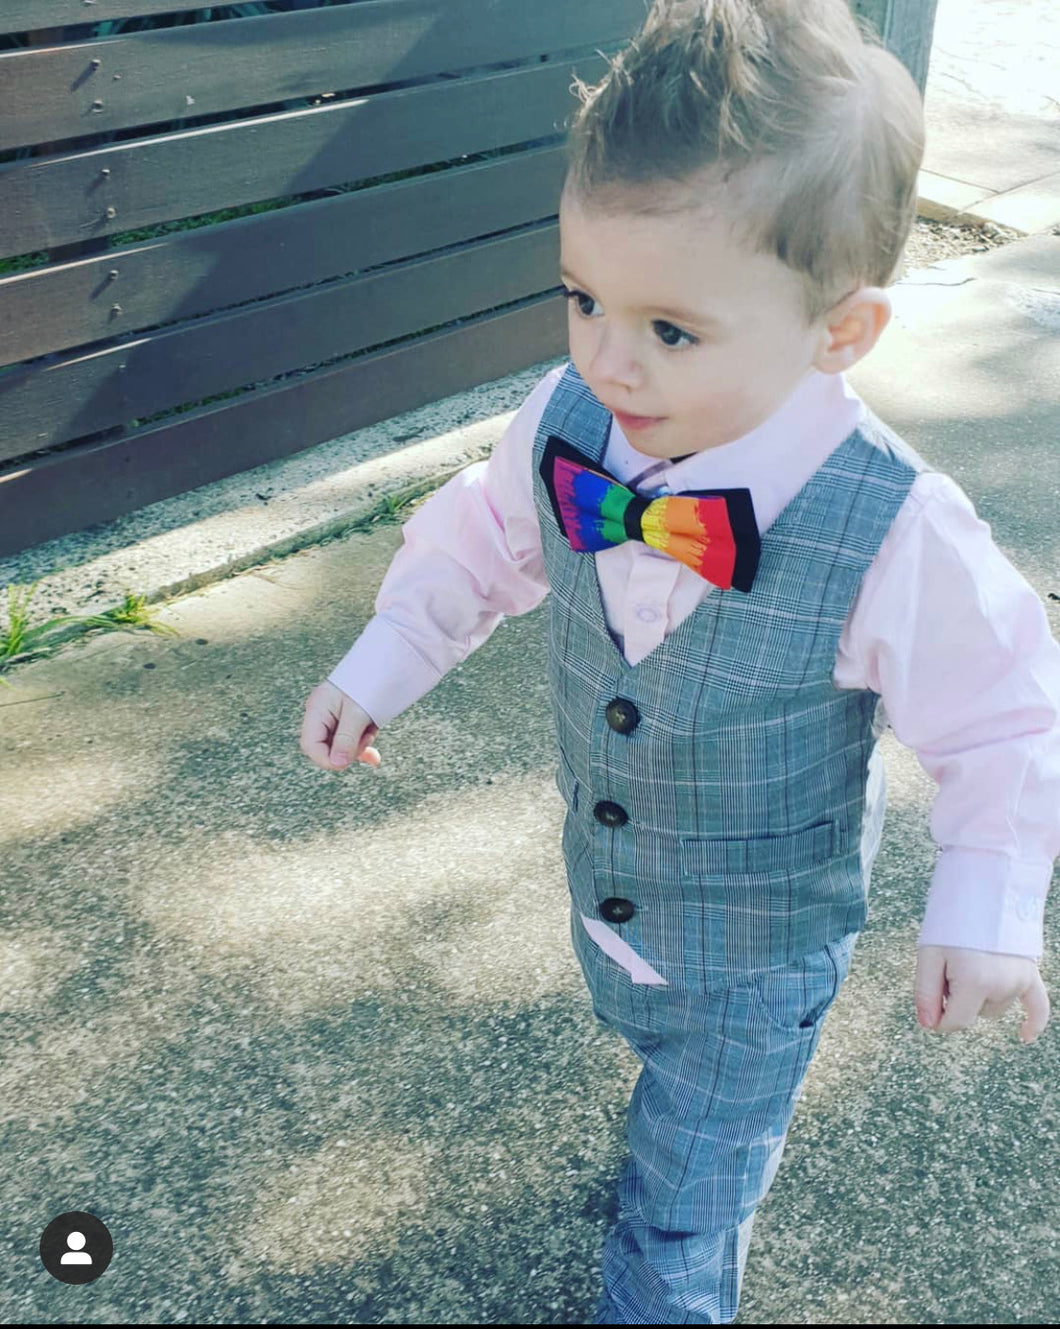 Boys pink and grey shirt, pant, vest and bow tie set